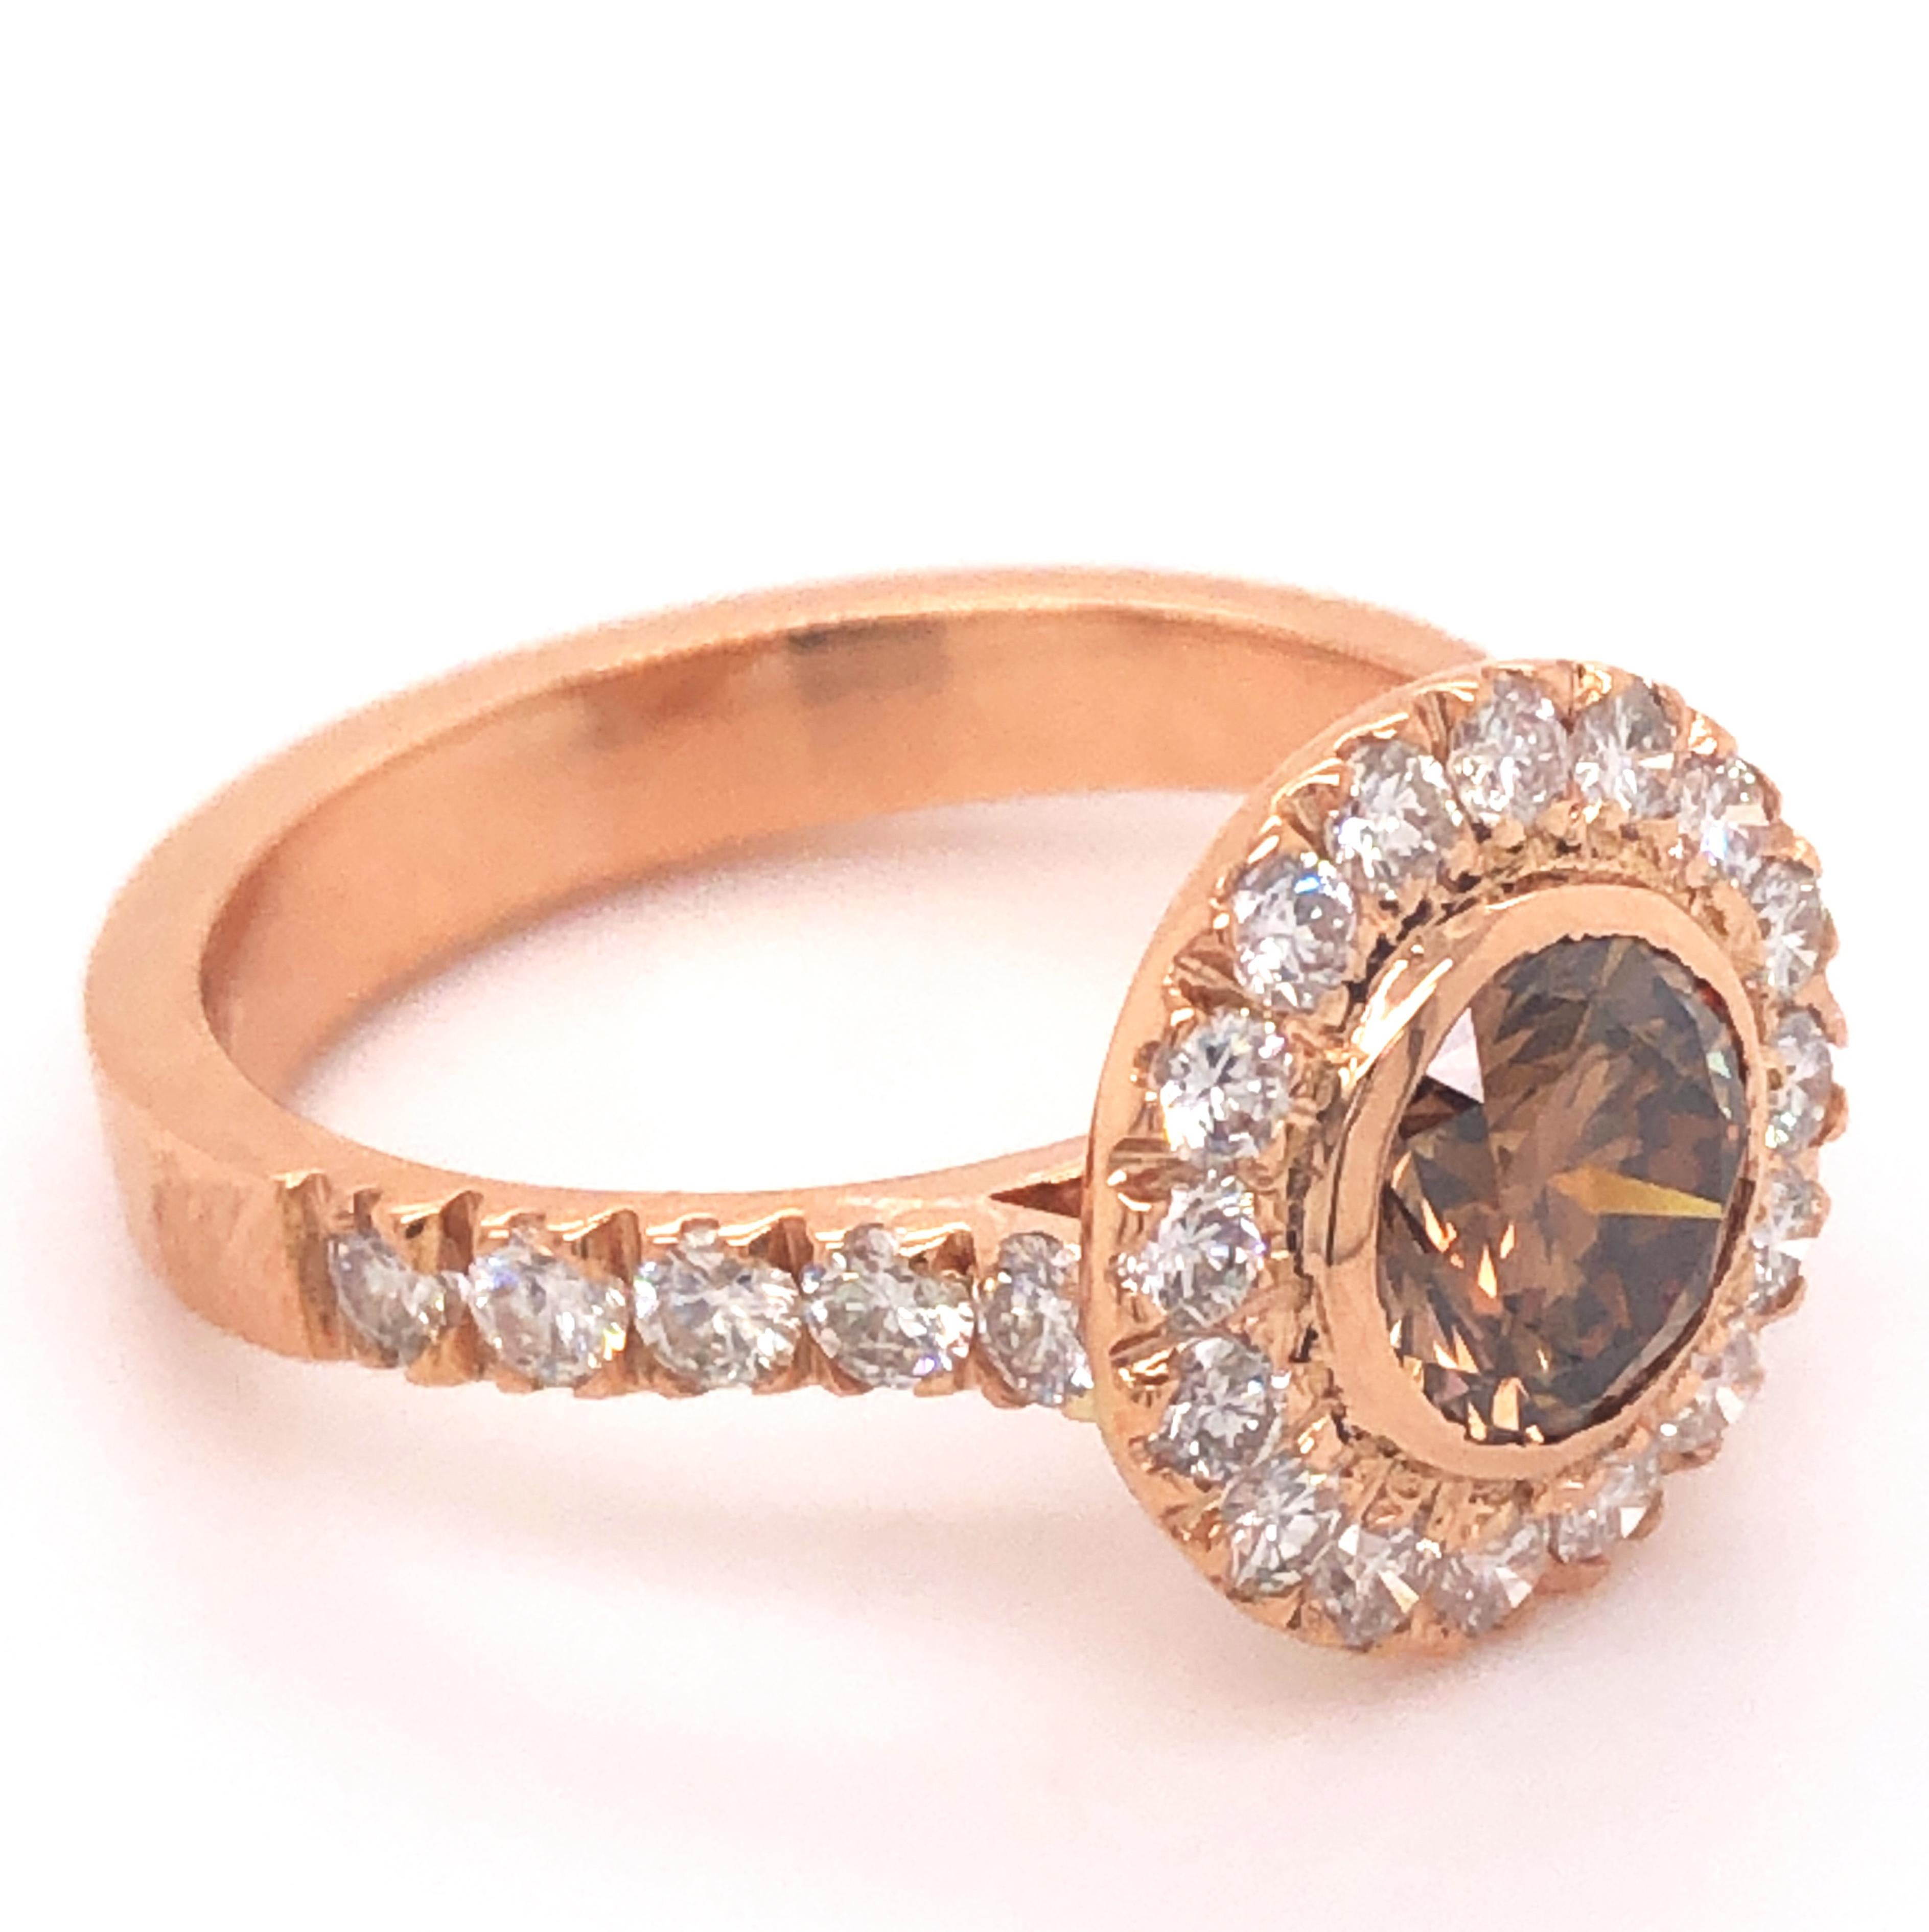 1.01 Carat IGI Certified Champagne Diamond in a Chic yet Timeless 0.85Kt Top Quality White Diamond Halo Rose Gold Setting.
IGI Certificate 492149946, September 17 2021 is included.
In our Brown Suede Leather Case and Pouch.
US Size 6 1/4, French